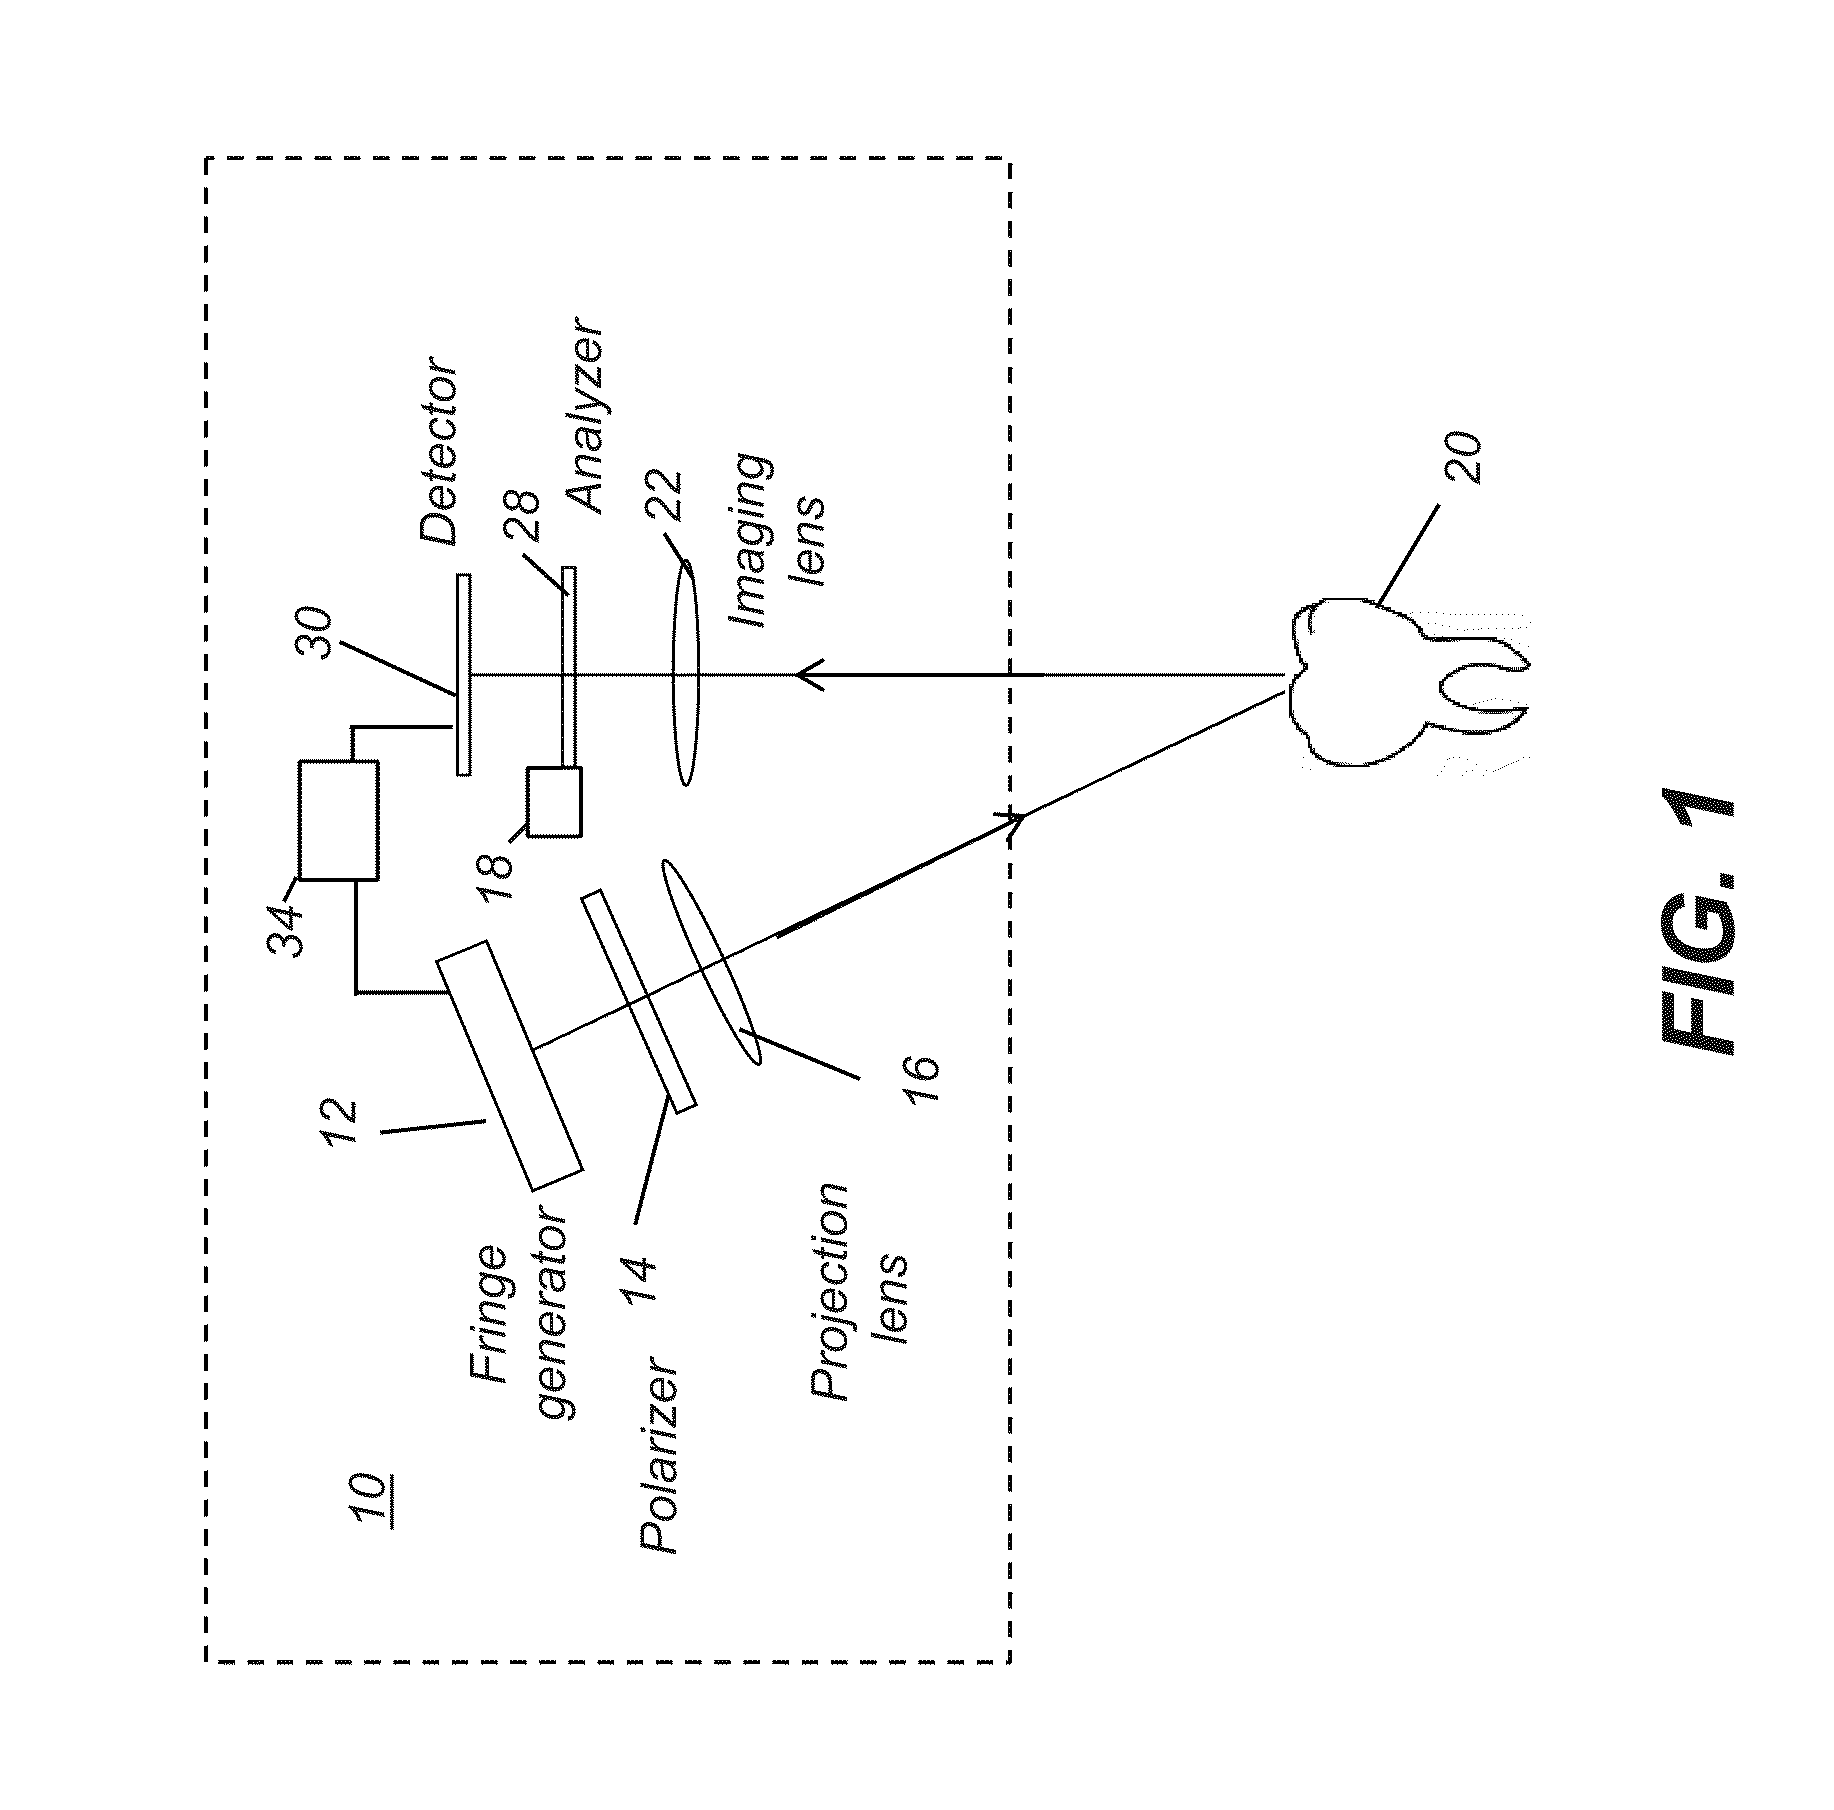 System and method for detecting tooth cracks